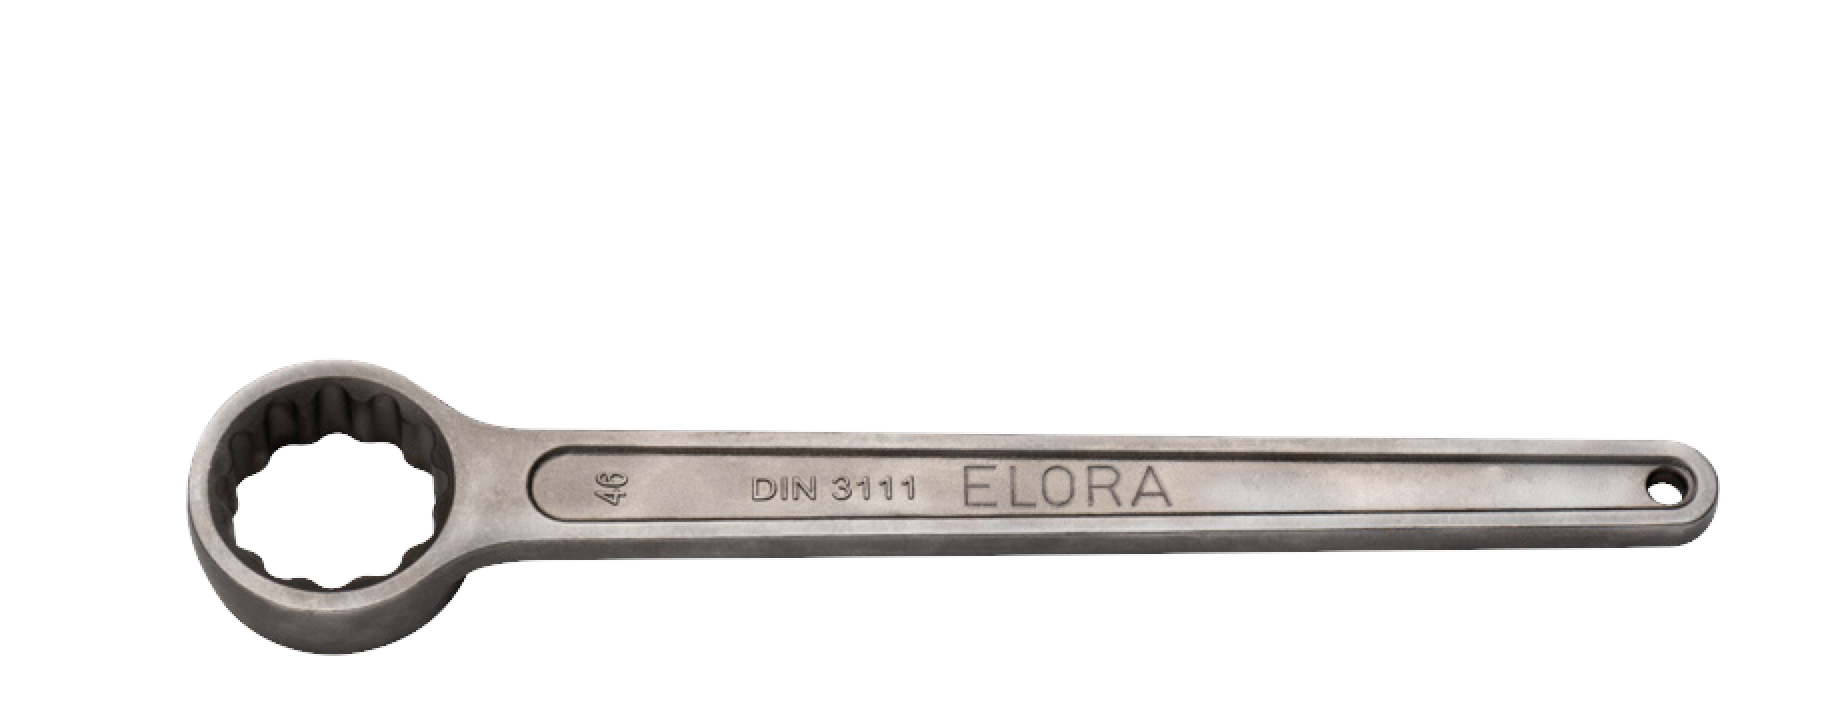 ELORA 88 Single Ring Ended Spanner 590-700mm (ELORA Tools) - Premium Single Ring Ended Spanner from ELORA - Shop now at Yew Aik.